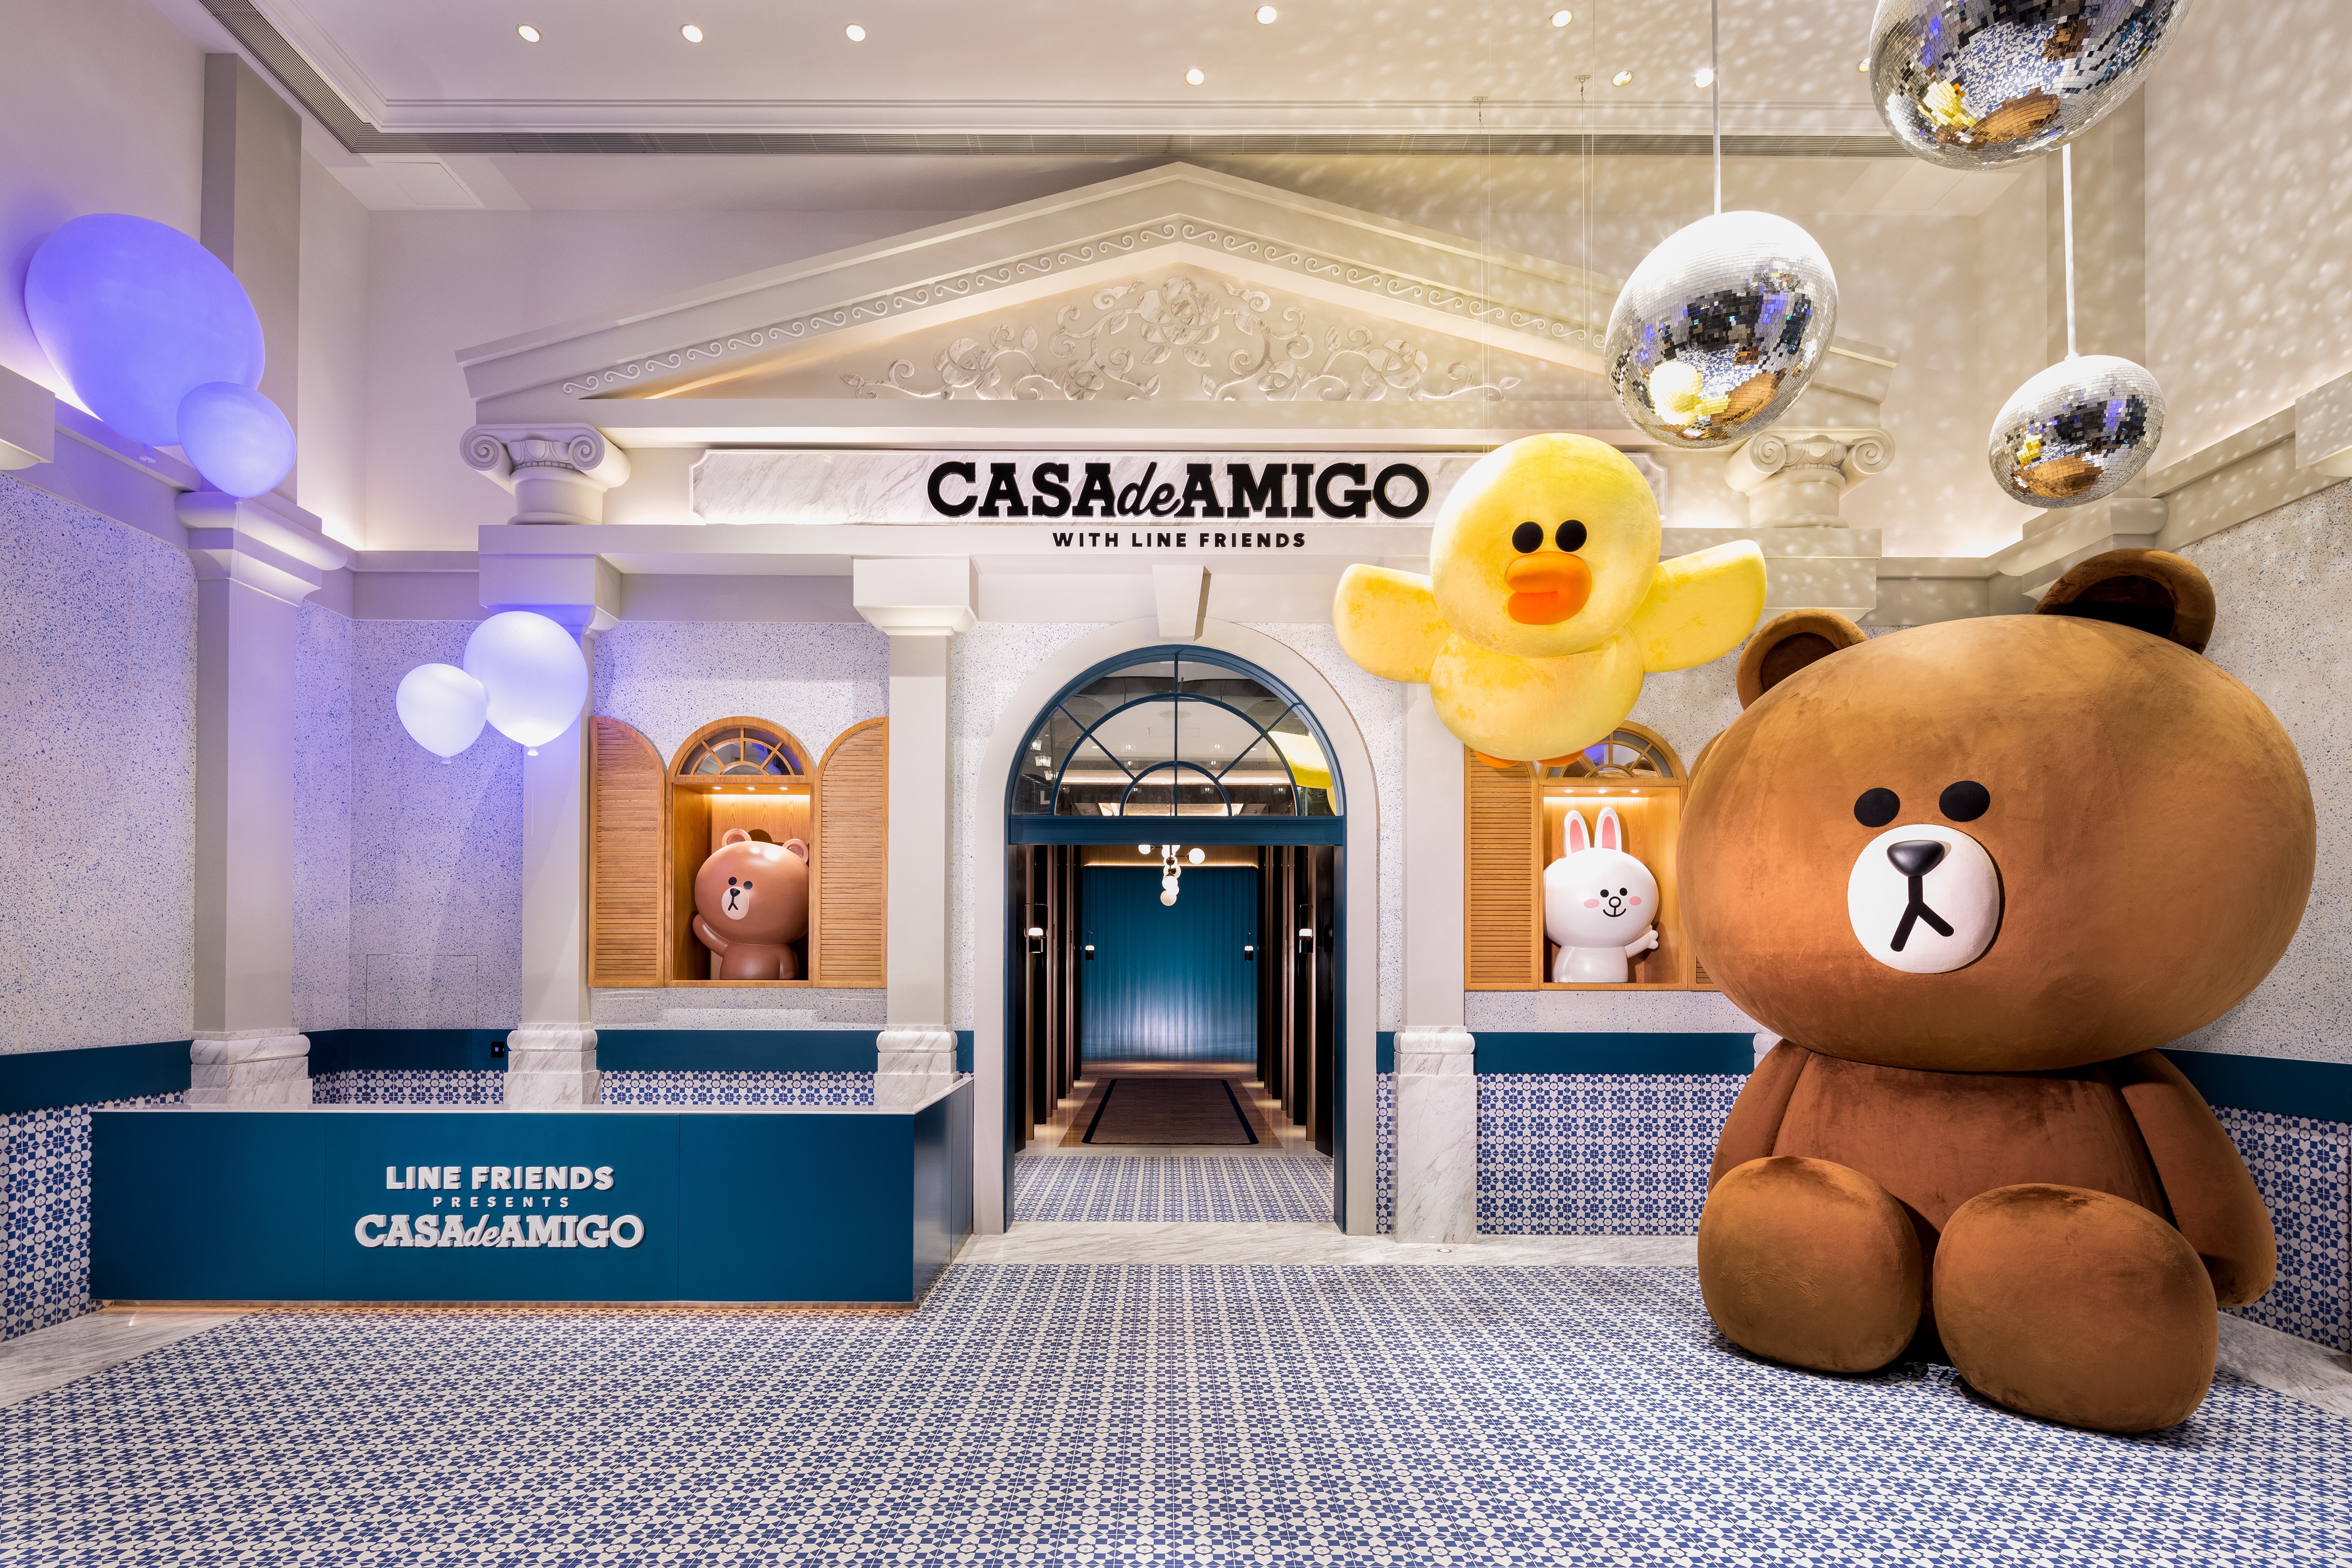 The lobby of LINE FRIENDS PRESENTS CASA DE AMIGO blends the characteristics of Macao’s Portuguese architecture with the iconic MEGA BROWN and the unique FLYING SALLY of LINE FRIENDS